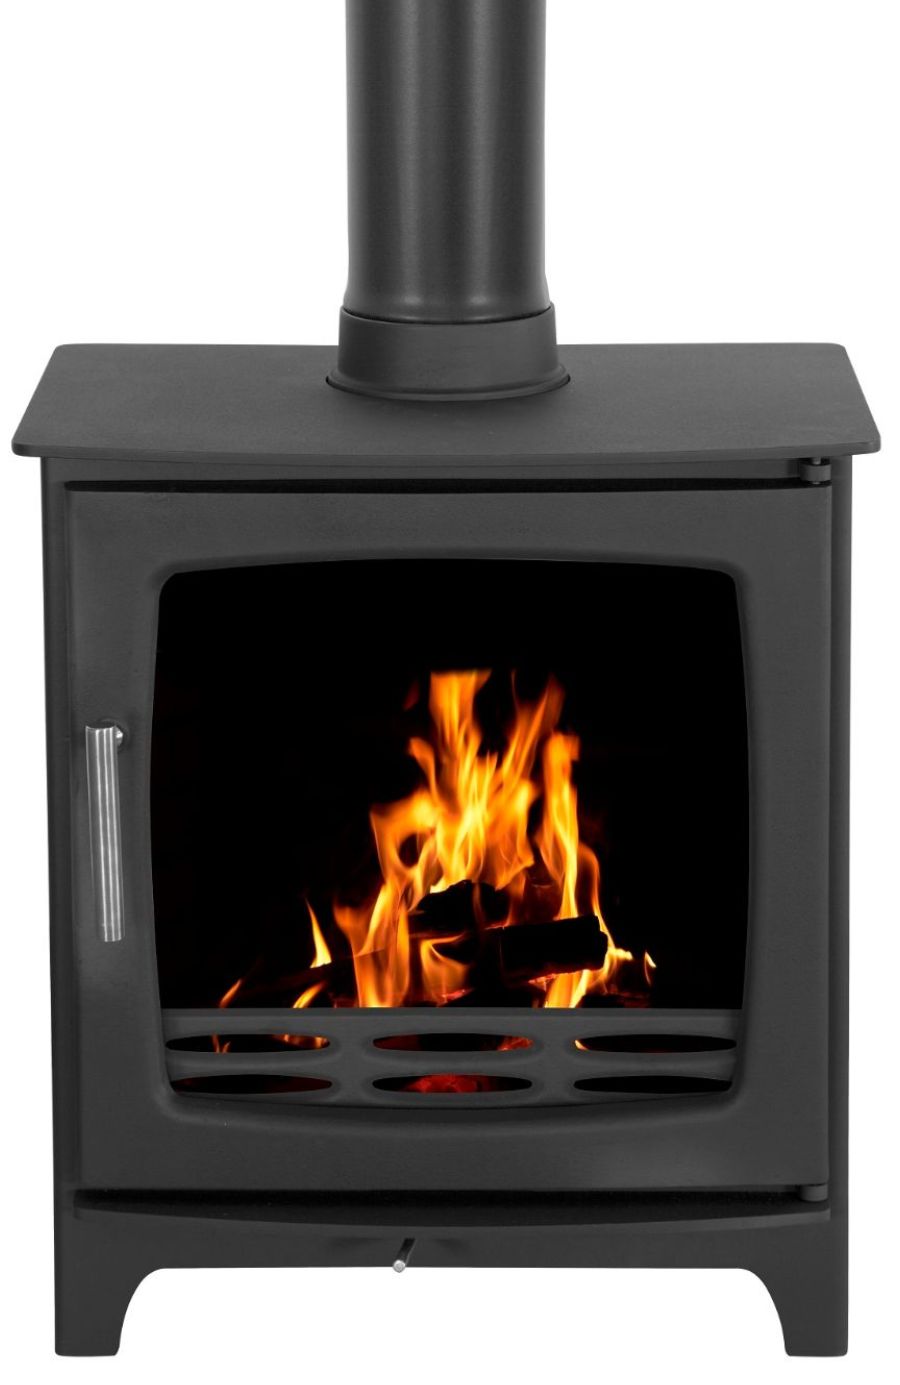 A black fire place with a chimney Description automatically generated